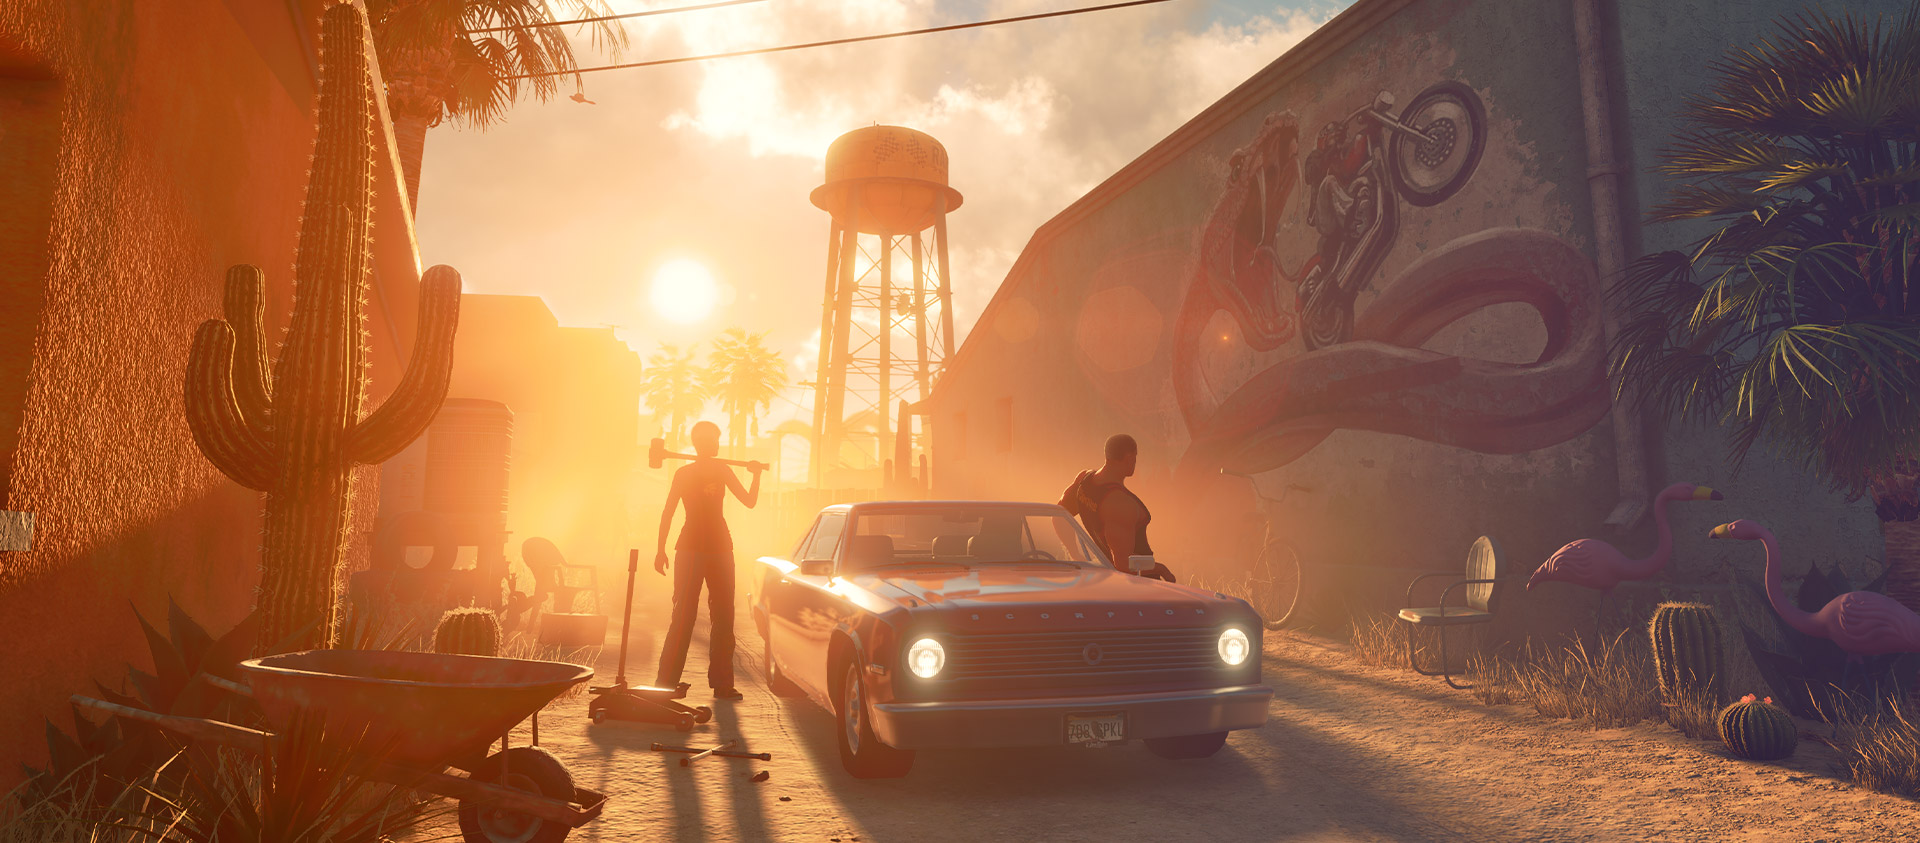 The setting sun casts long shadows over two people repairing a muscle car.